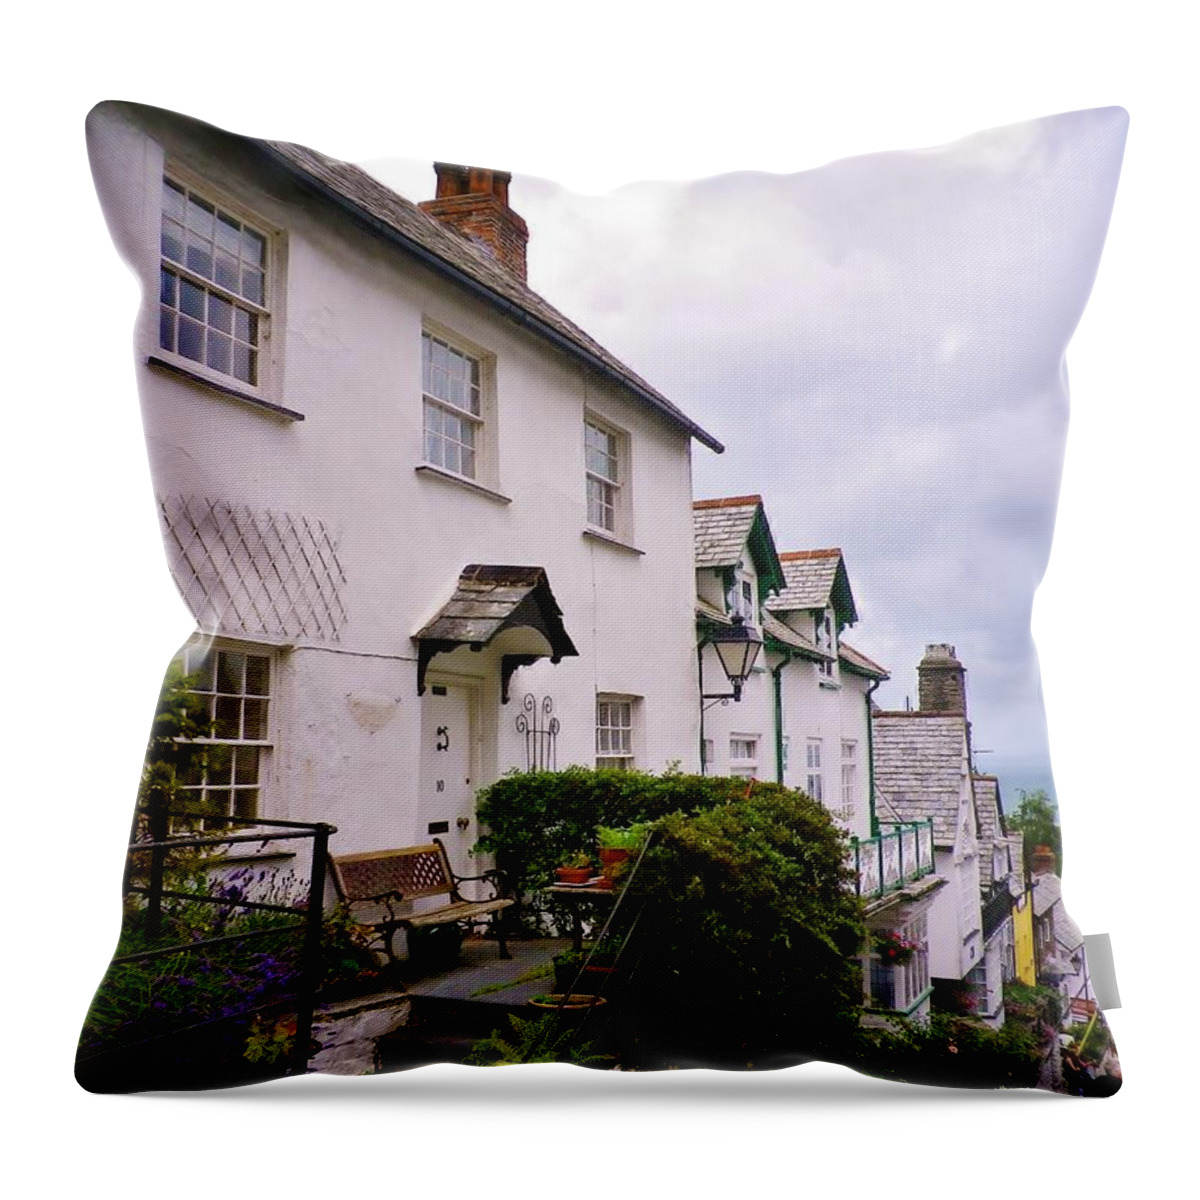 Clovelly Throw Pillow featuring the photograph Clovelly Street View by Richard Brookes